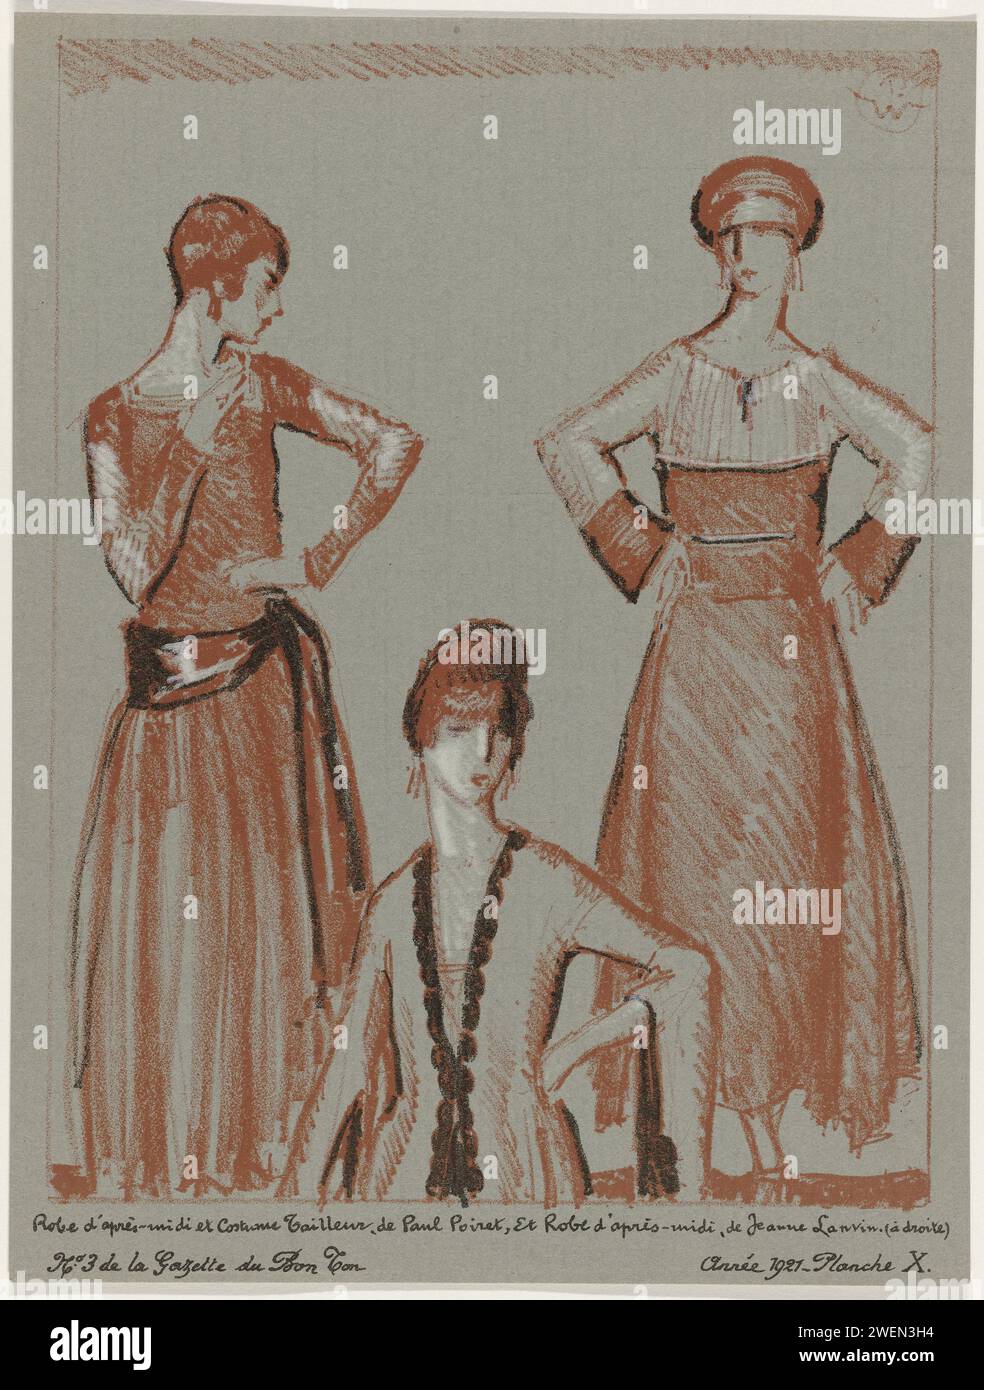 Gazette du Bon tone, 1921-No. 3, pl. X: afternoon dress and tailor costume, from Paul Poiret, and afternoon dress, by Jeanne Lanvin, Porter Woodruff, 1921  Two women, one of which is halfway, are dressed in an afternoon gown and a suit by Paul Poiret. The woman on the right is wearing an afternoon gown from Jeanne Lanvin. Planche X from a series of four lithographs entitled: 'Les Modes and L'An de Grace Mil Neuf Cent Vingt Un', from Gazette du Bon Ton 1921, No. 3. Explanation about the clothing on page 'Explication des planches'.  paper  fashion plates. dress, gown: day dress (+ women's clothe Stock Photo